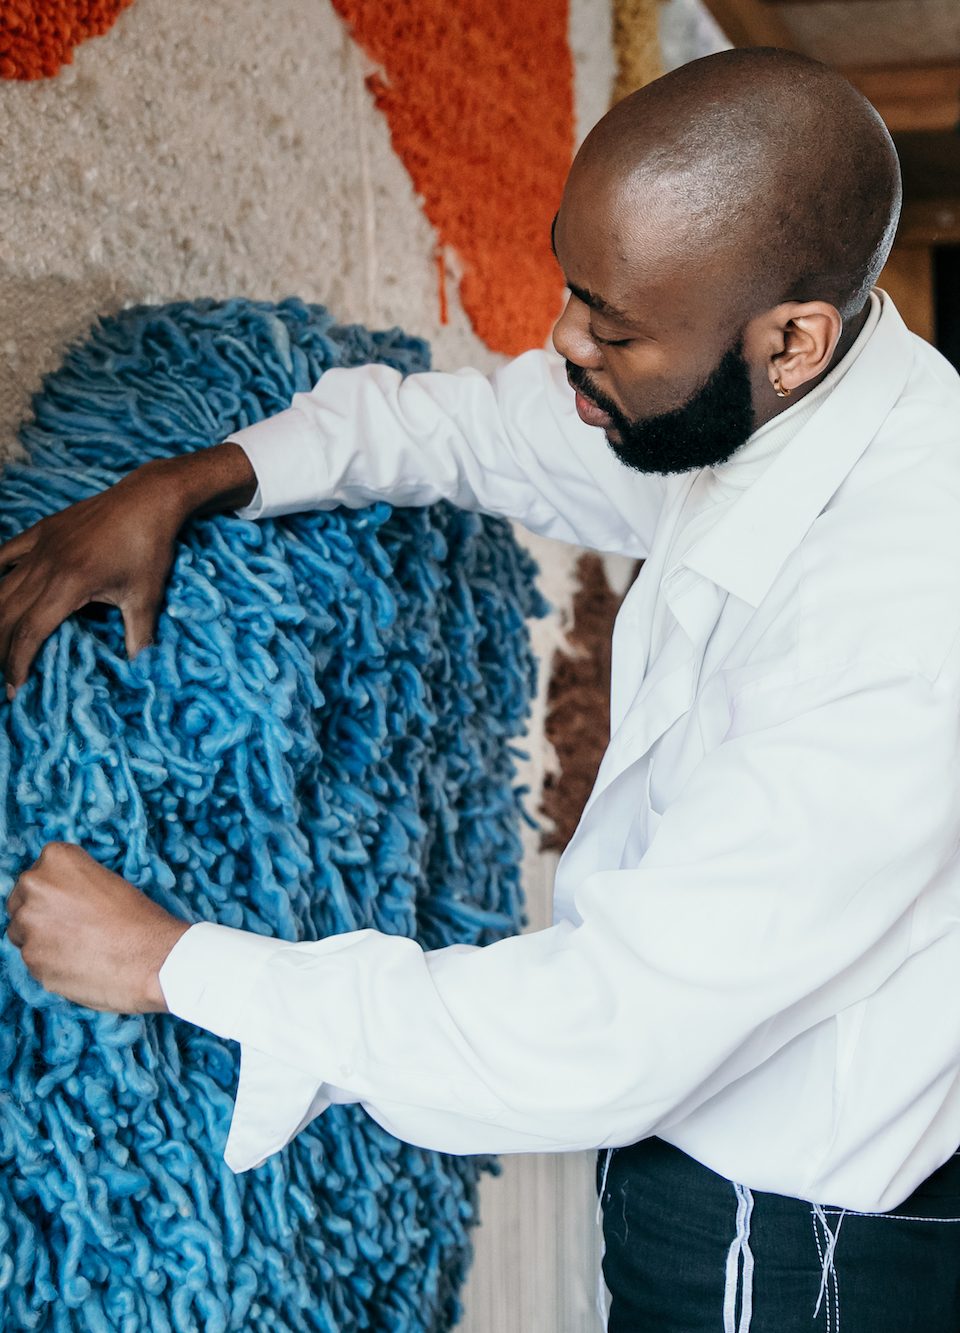 In South Africa, Rich Mnisi Is Taking Biomorphic Design to the Next Level